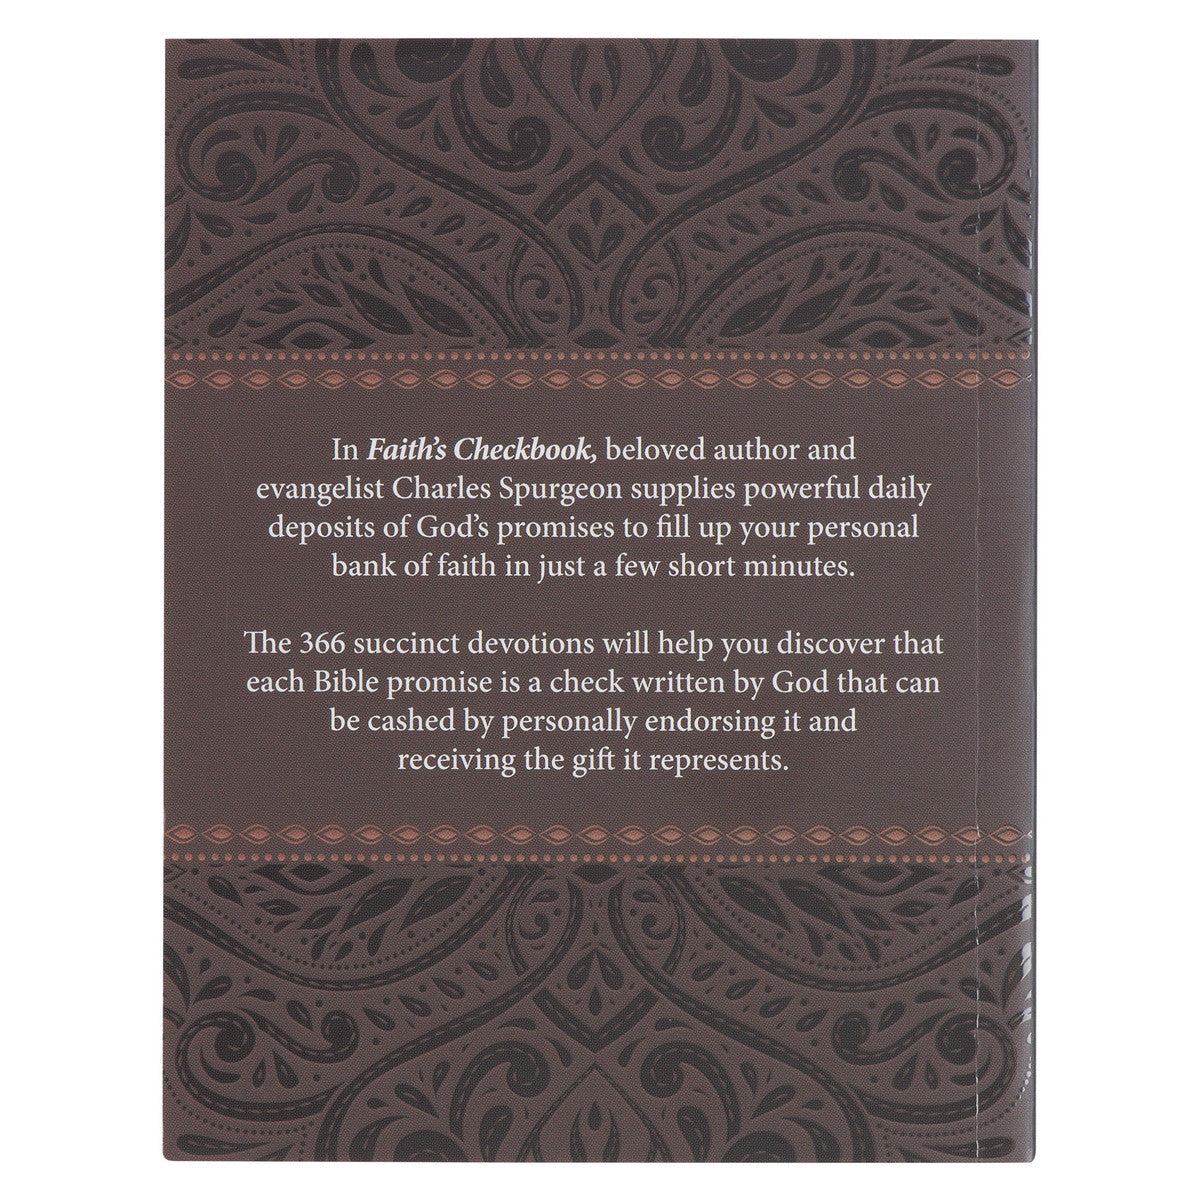 Faith's Checkbook Brown Softcover One-Minute Devotions